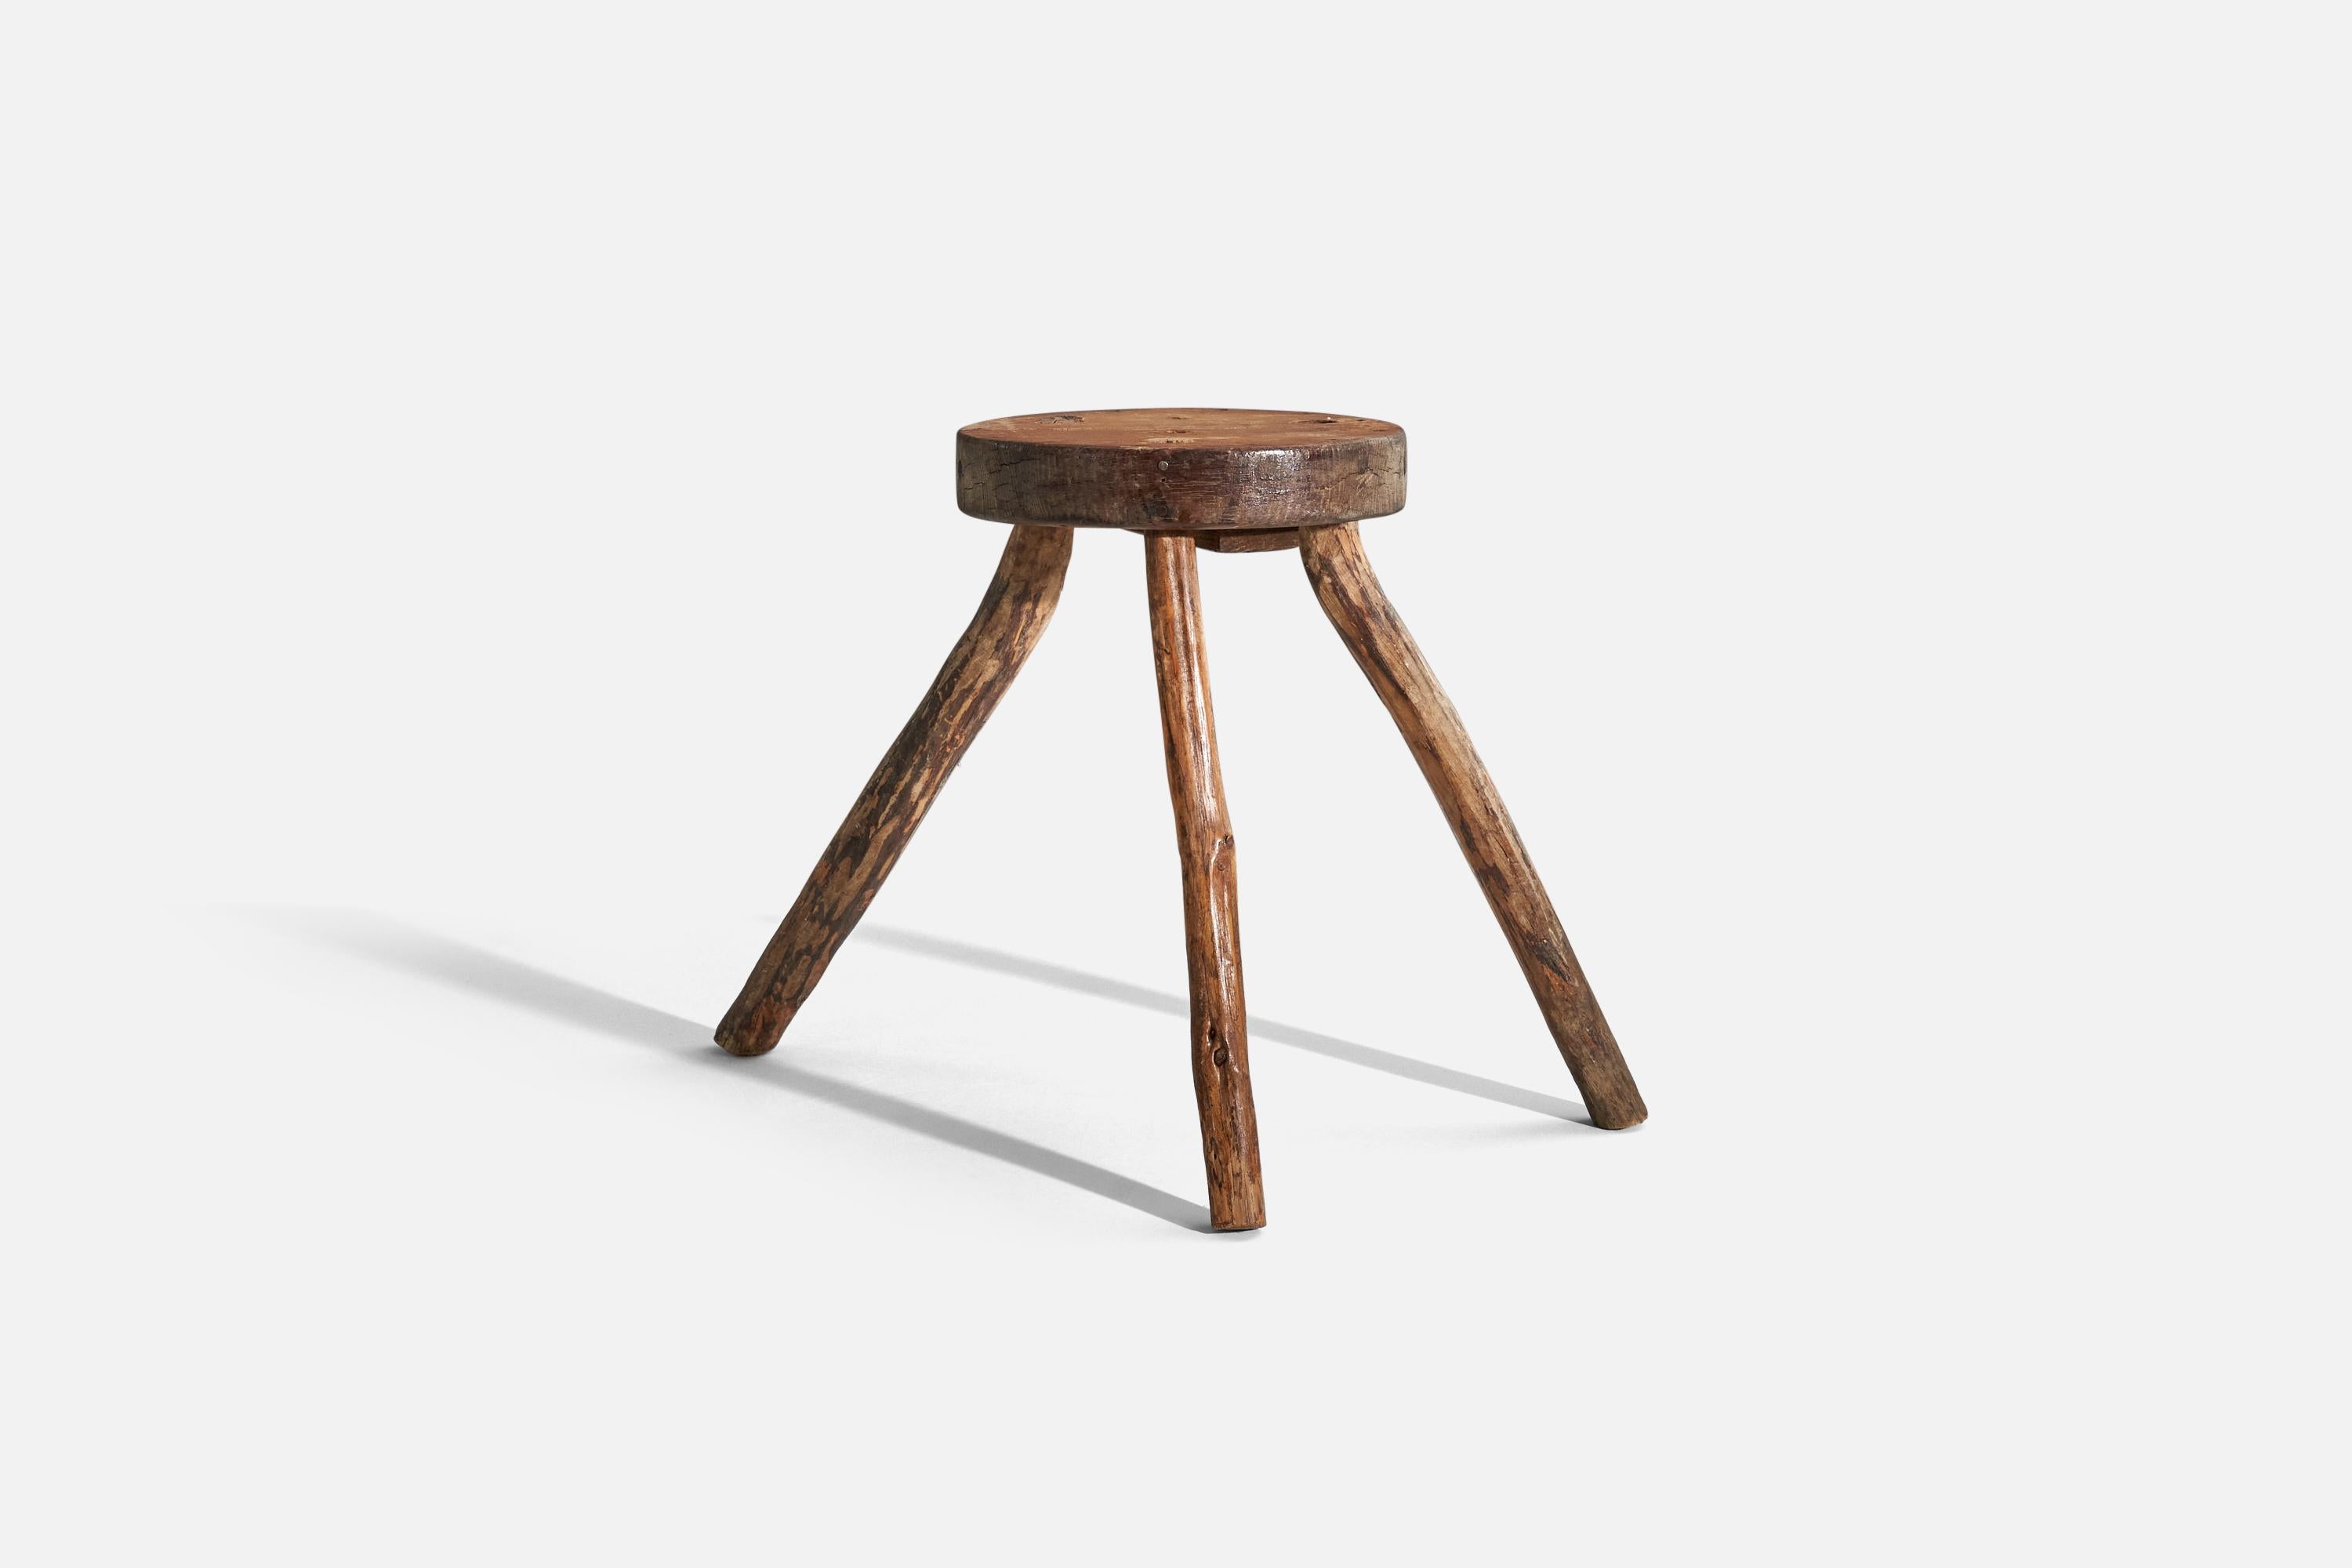 A wooden stool designed and produced in Sweden, c. 1900s.